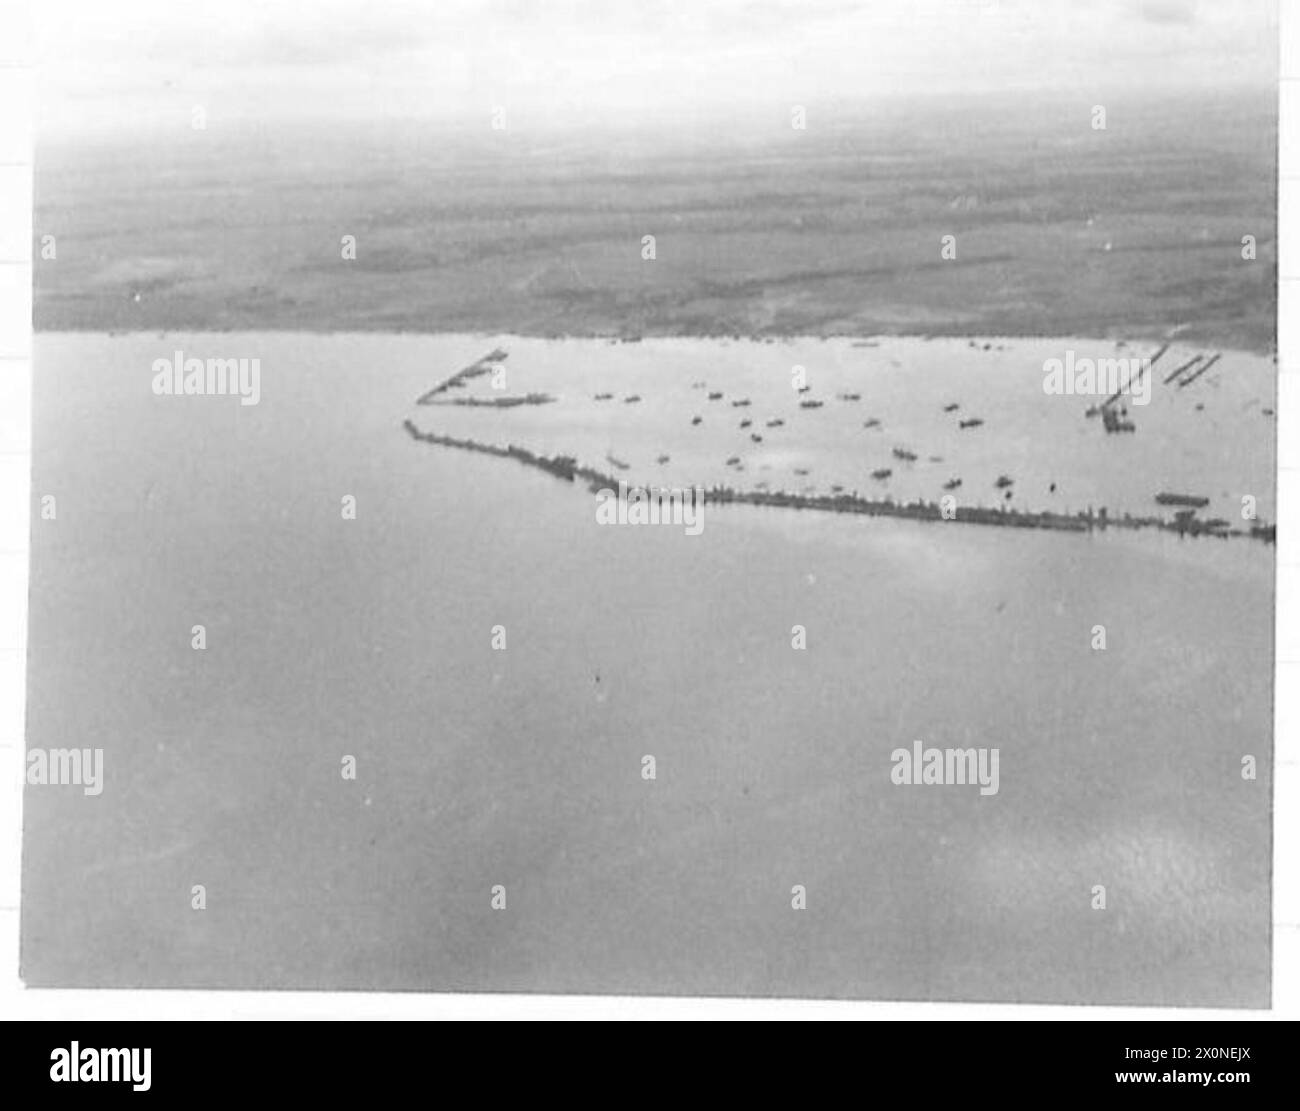 THE BRITISH ARMY IN NORTH-WEST EUROPE 1944-1946 - Aerial photographs of Mulberry B arromanches Photographic negative , British Army, 21st Army Group Stock Photo